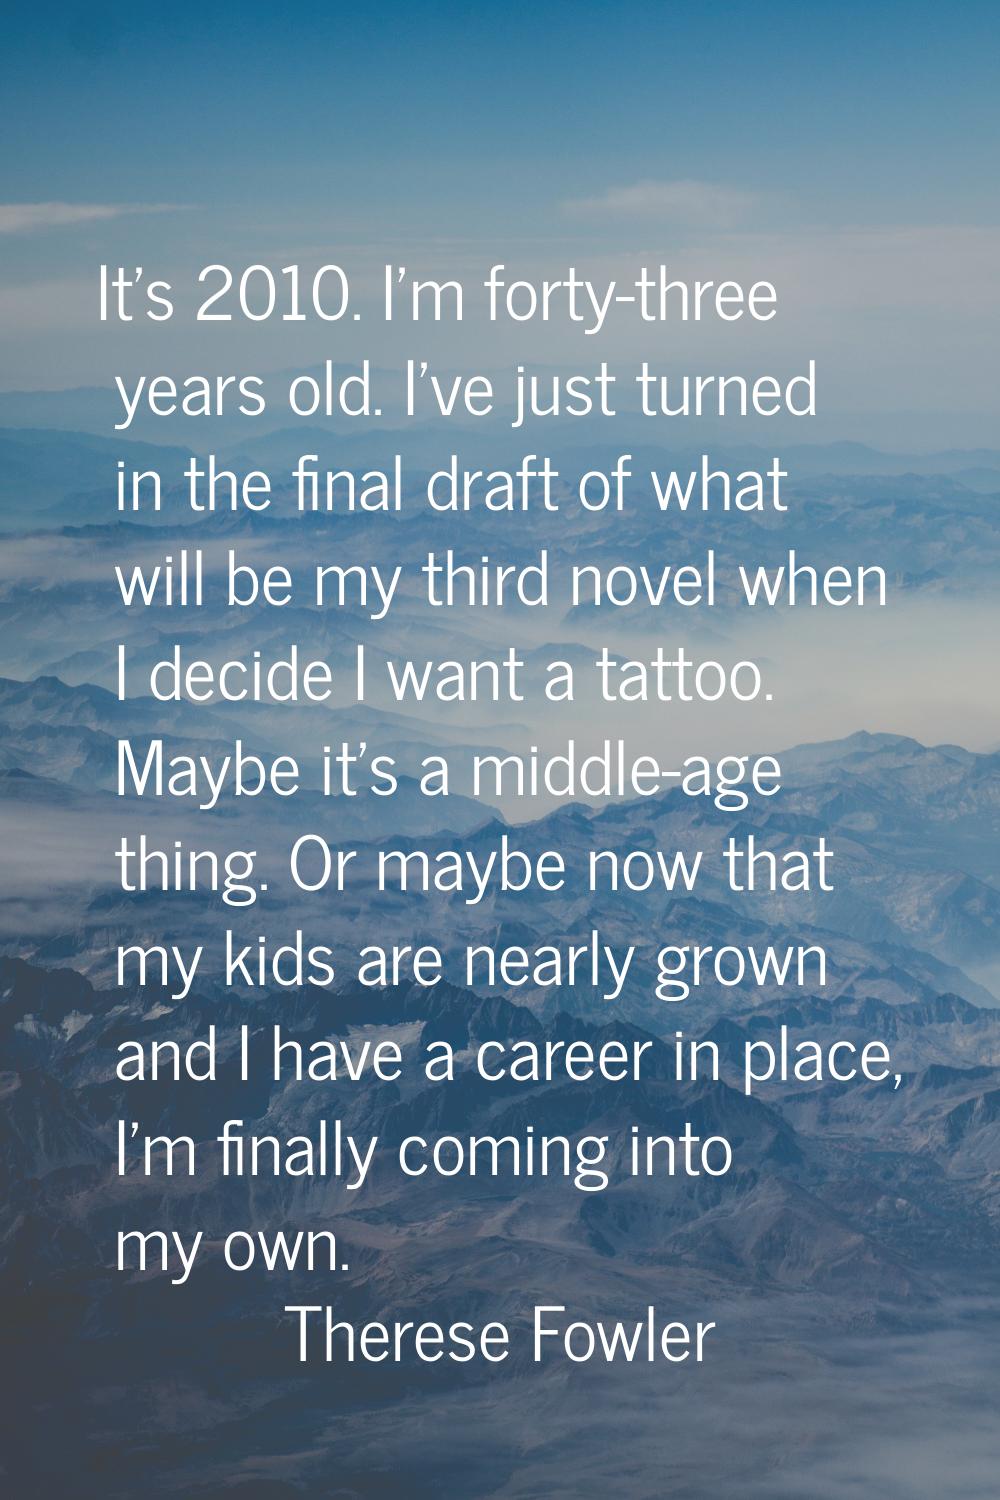 It's 2010. I'm forty-three years old. I've just turned in the final draft of what will be my third 